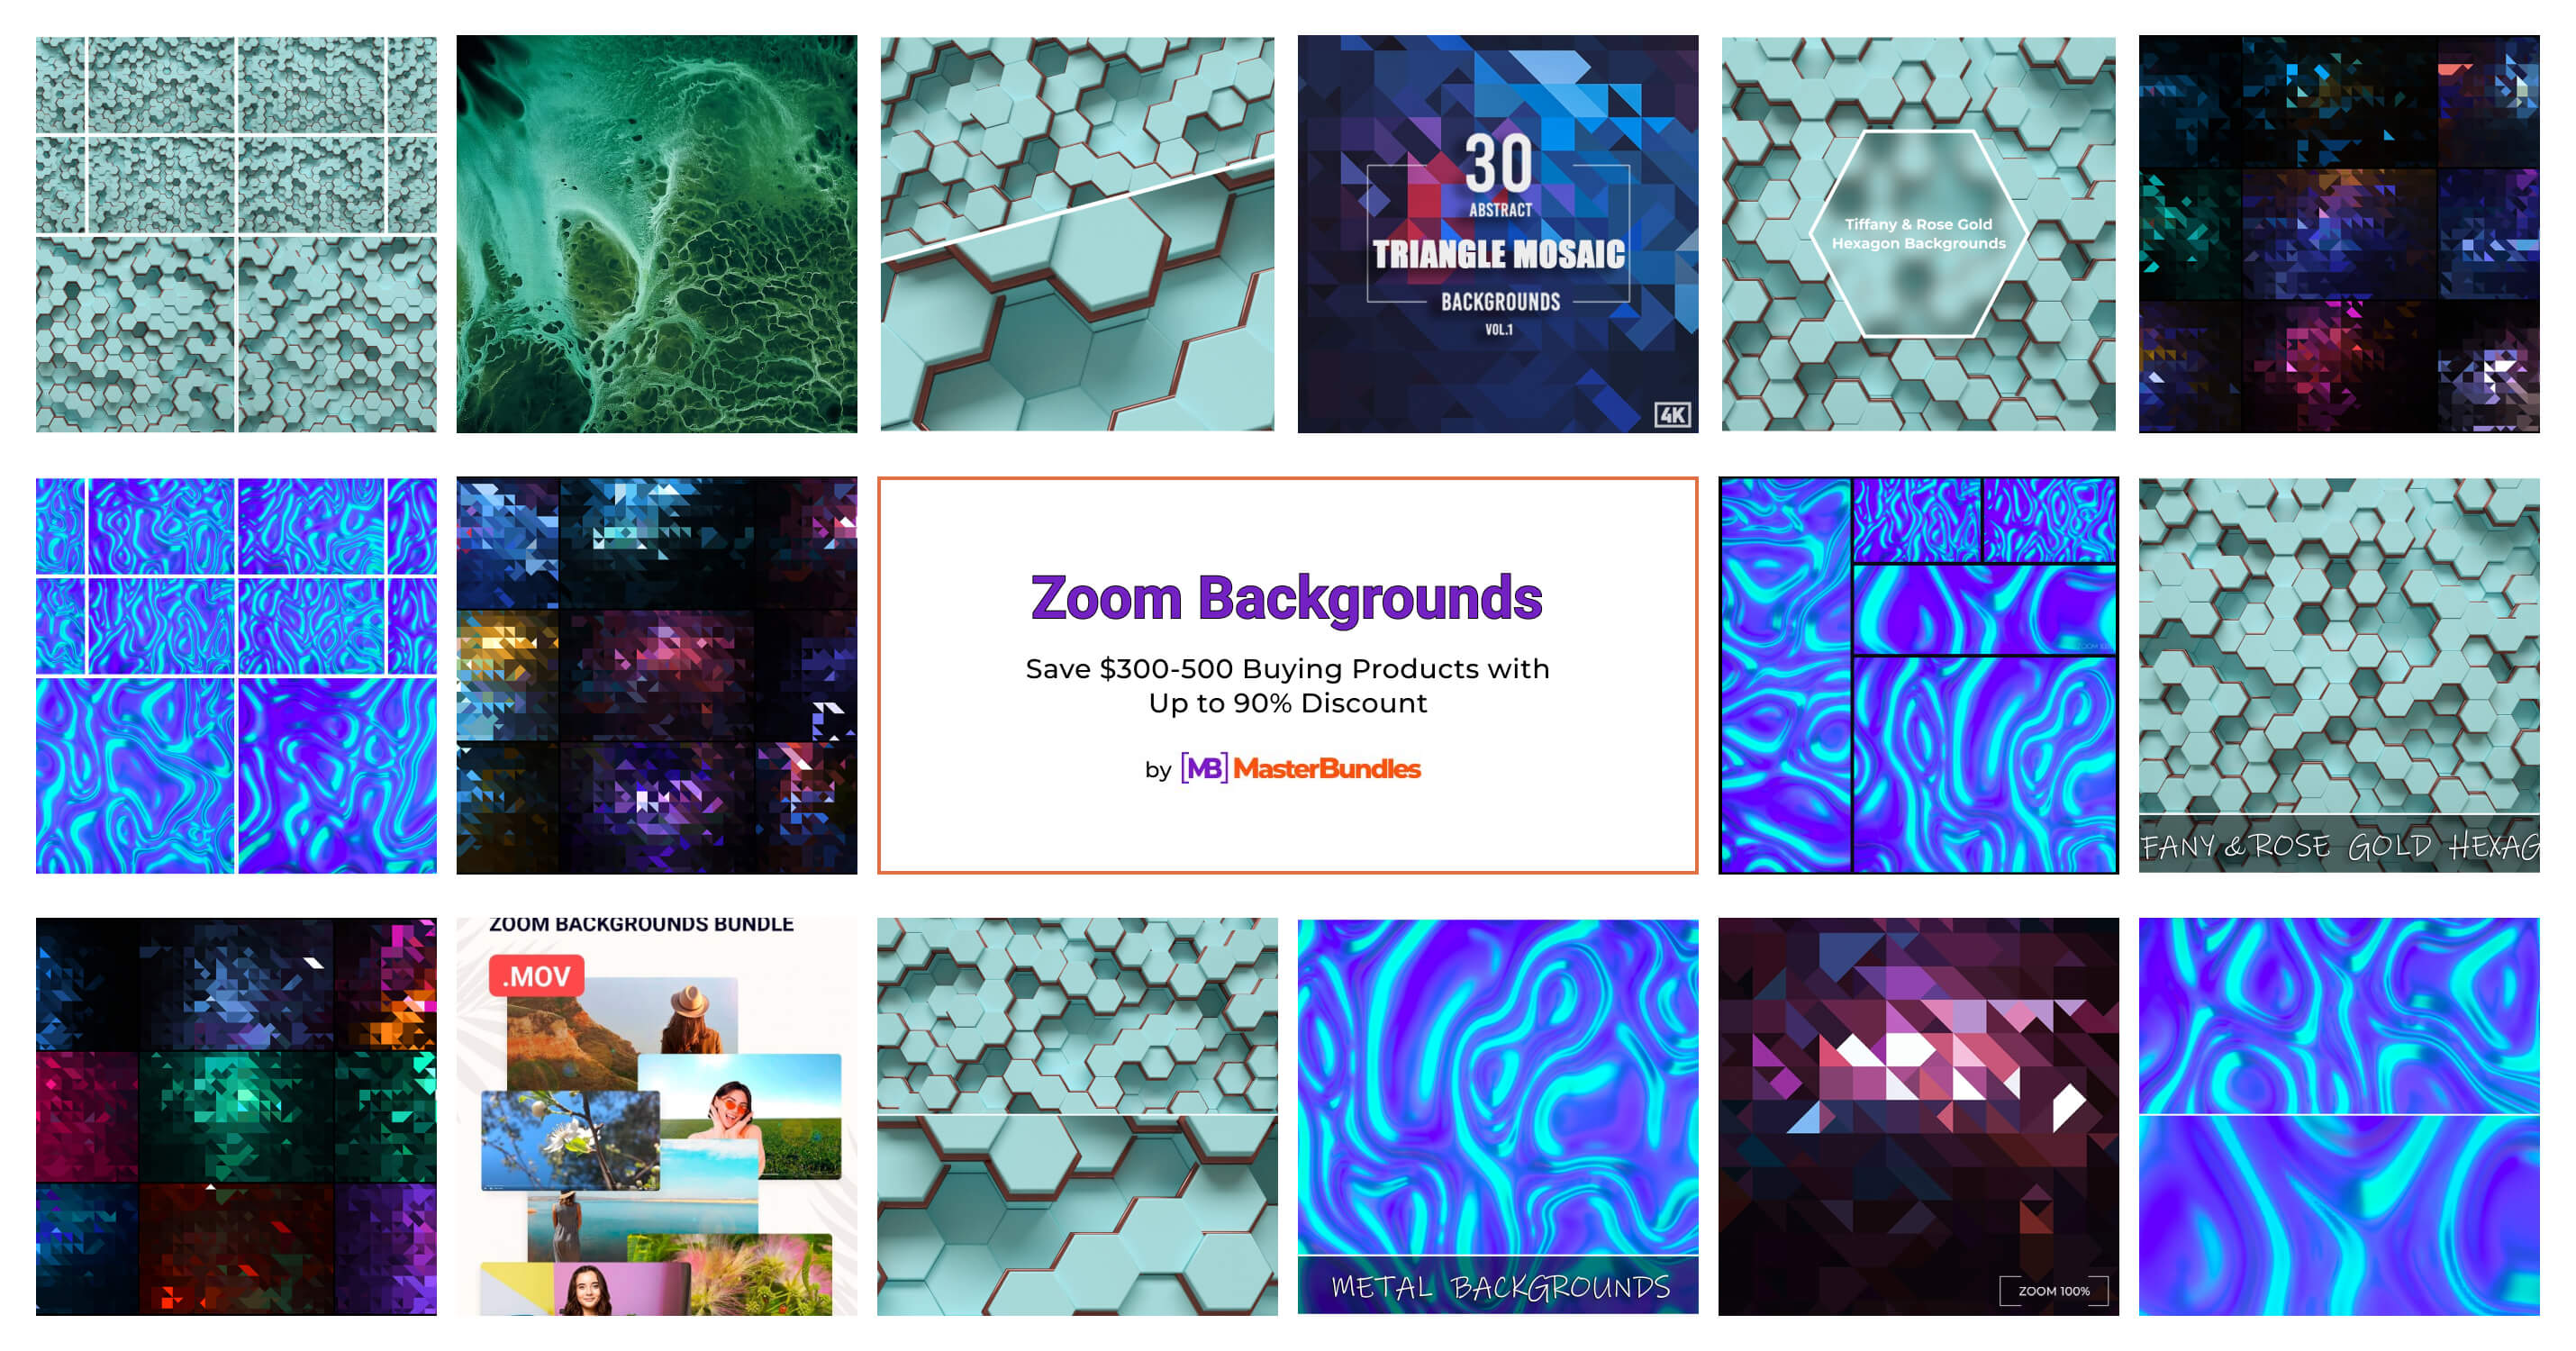 Zoom Backgrounds 1 